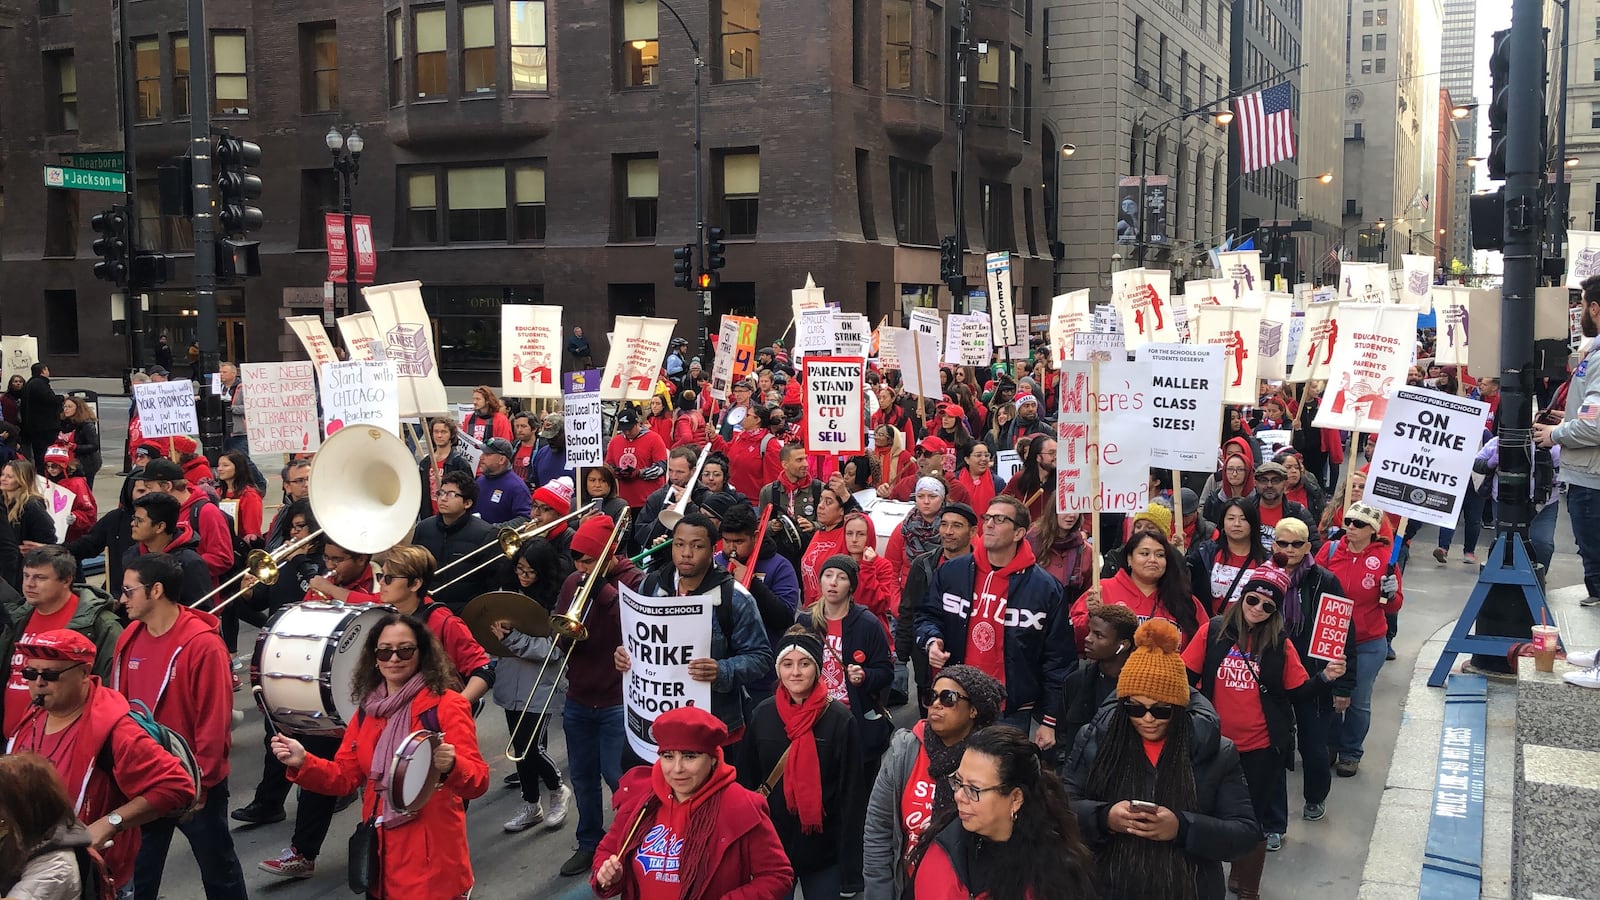 Striking Chicago teachers and supporters march downtown in a rally midday Oct. 17, 2019, to press their demands.